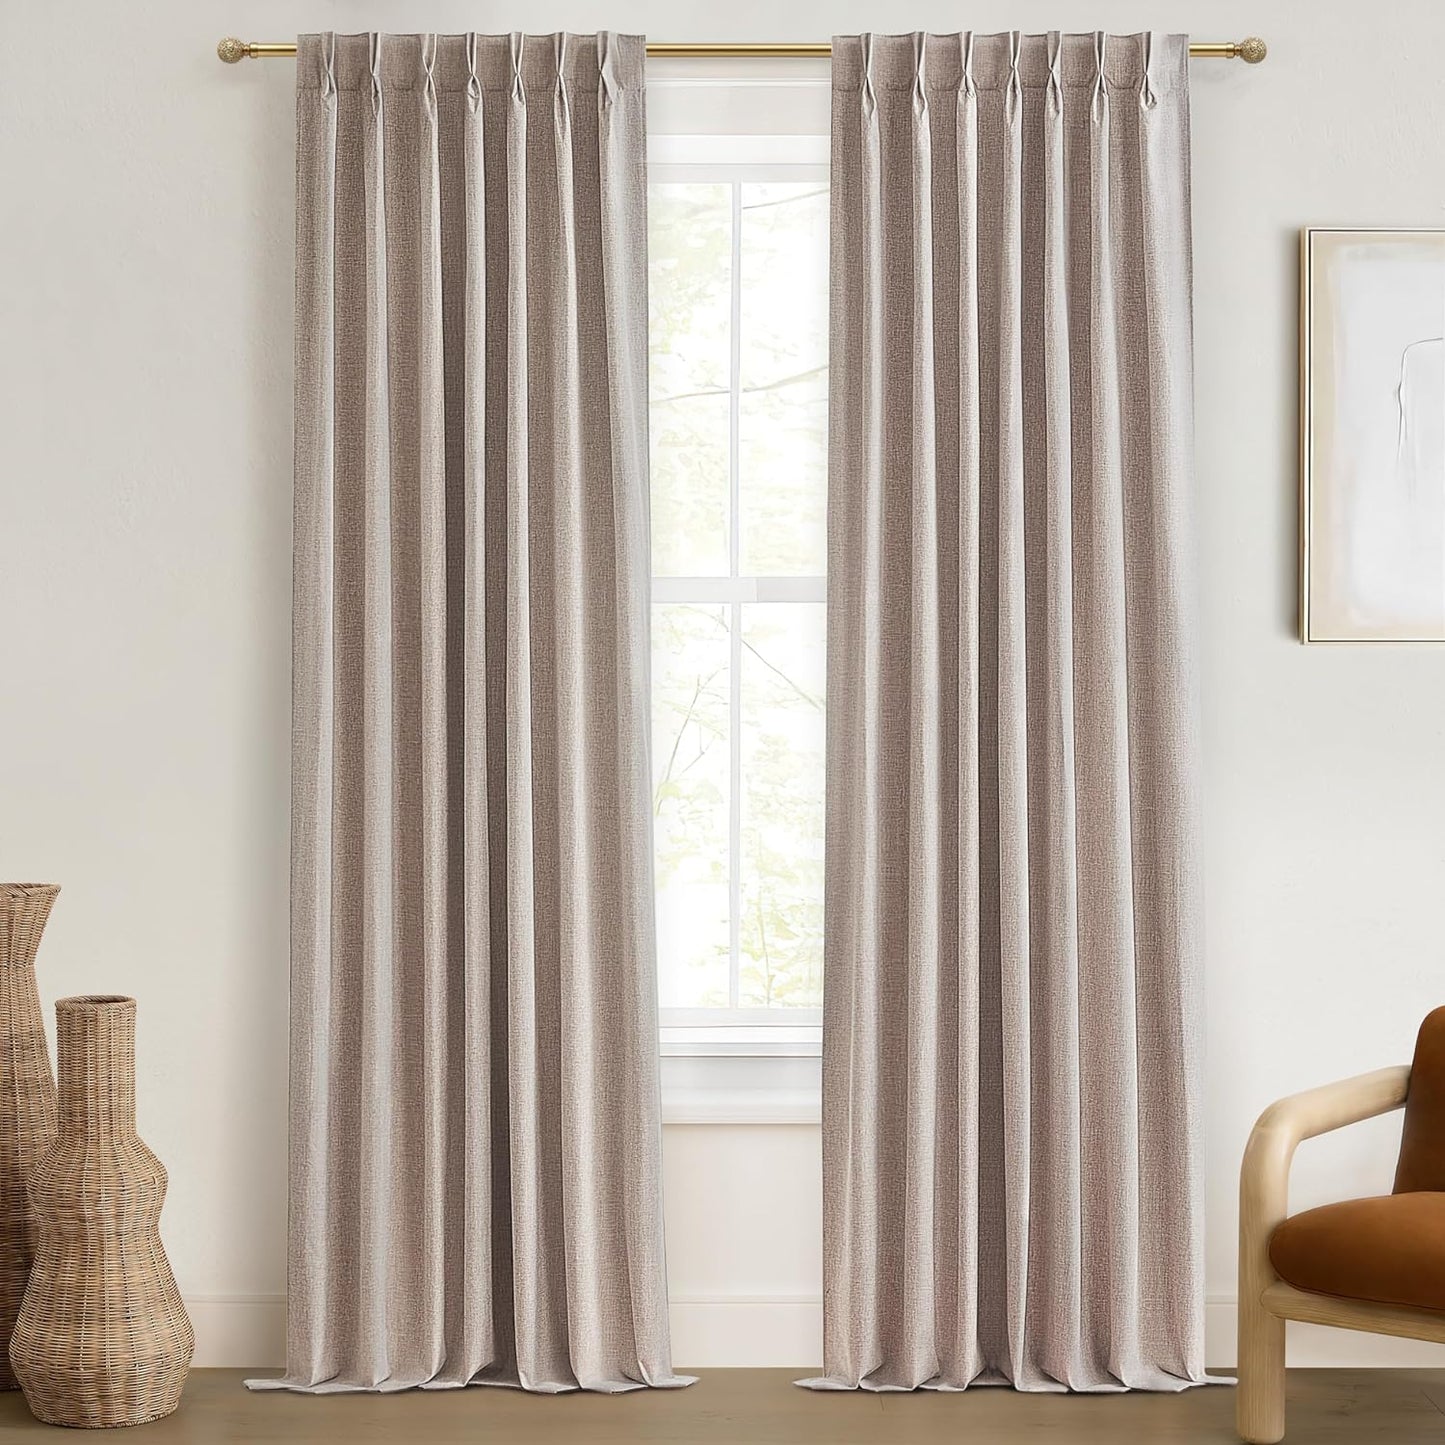 Natural Linen Pinch Pleated Blackout Curtains & Drapes 96 Inch Long Bedroom/Livingroom Farmhouse Curtains 2 Panel Sets, Neutral Track Room Darkening Thermal Insulated 8Ft Back Tab Window Curtain  QJmydeco Linen 40"W X 102"L X 2 Panels 